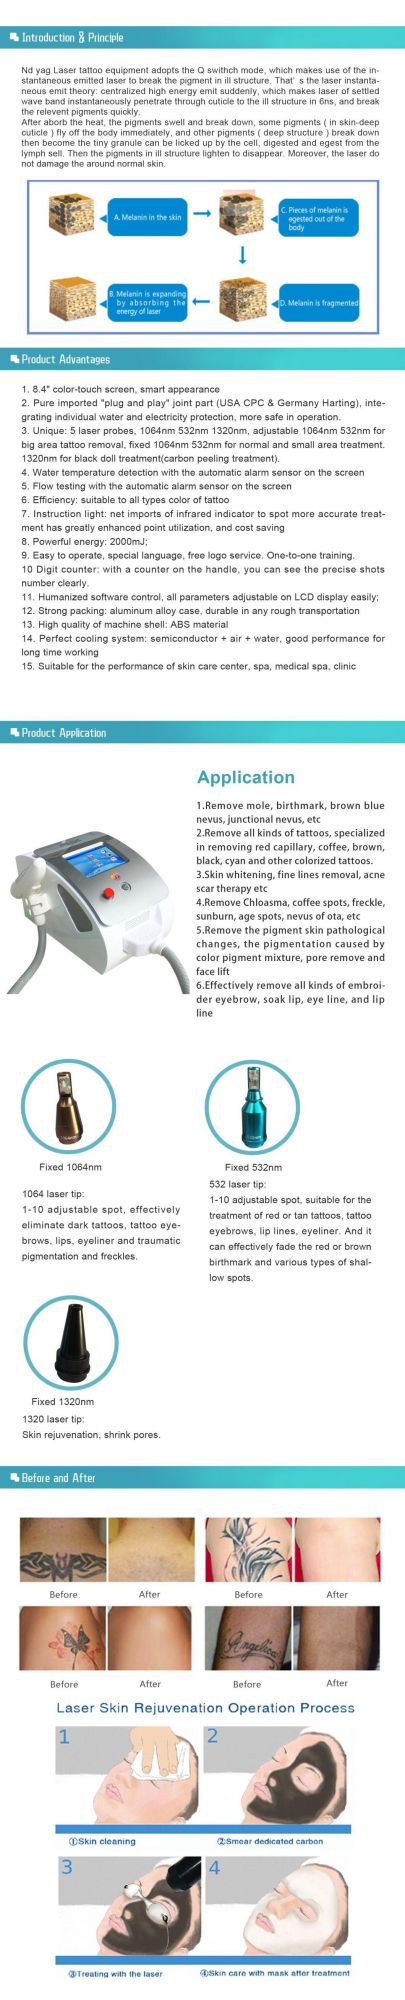 Q-Switch ND YAG Laser Tattoo Removal Machine for Sale